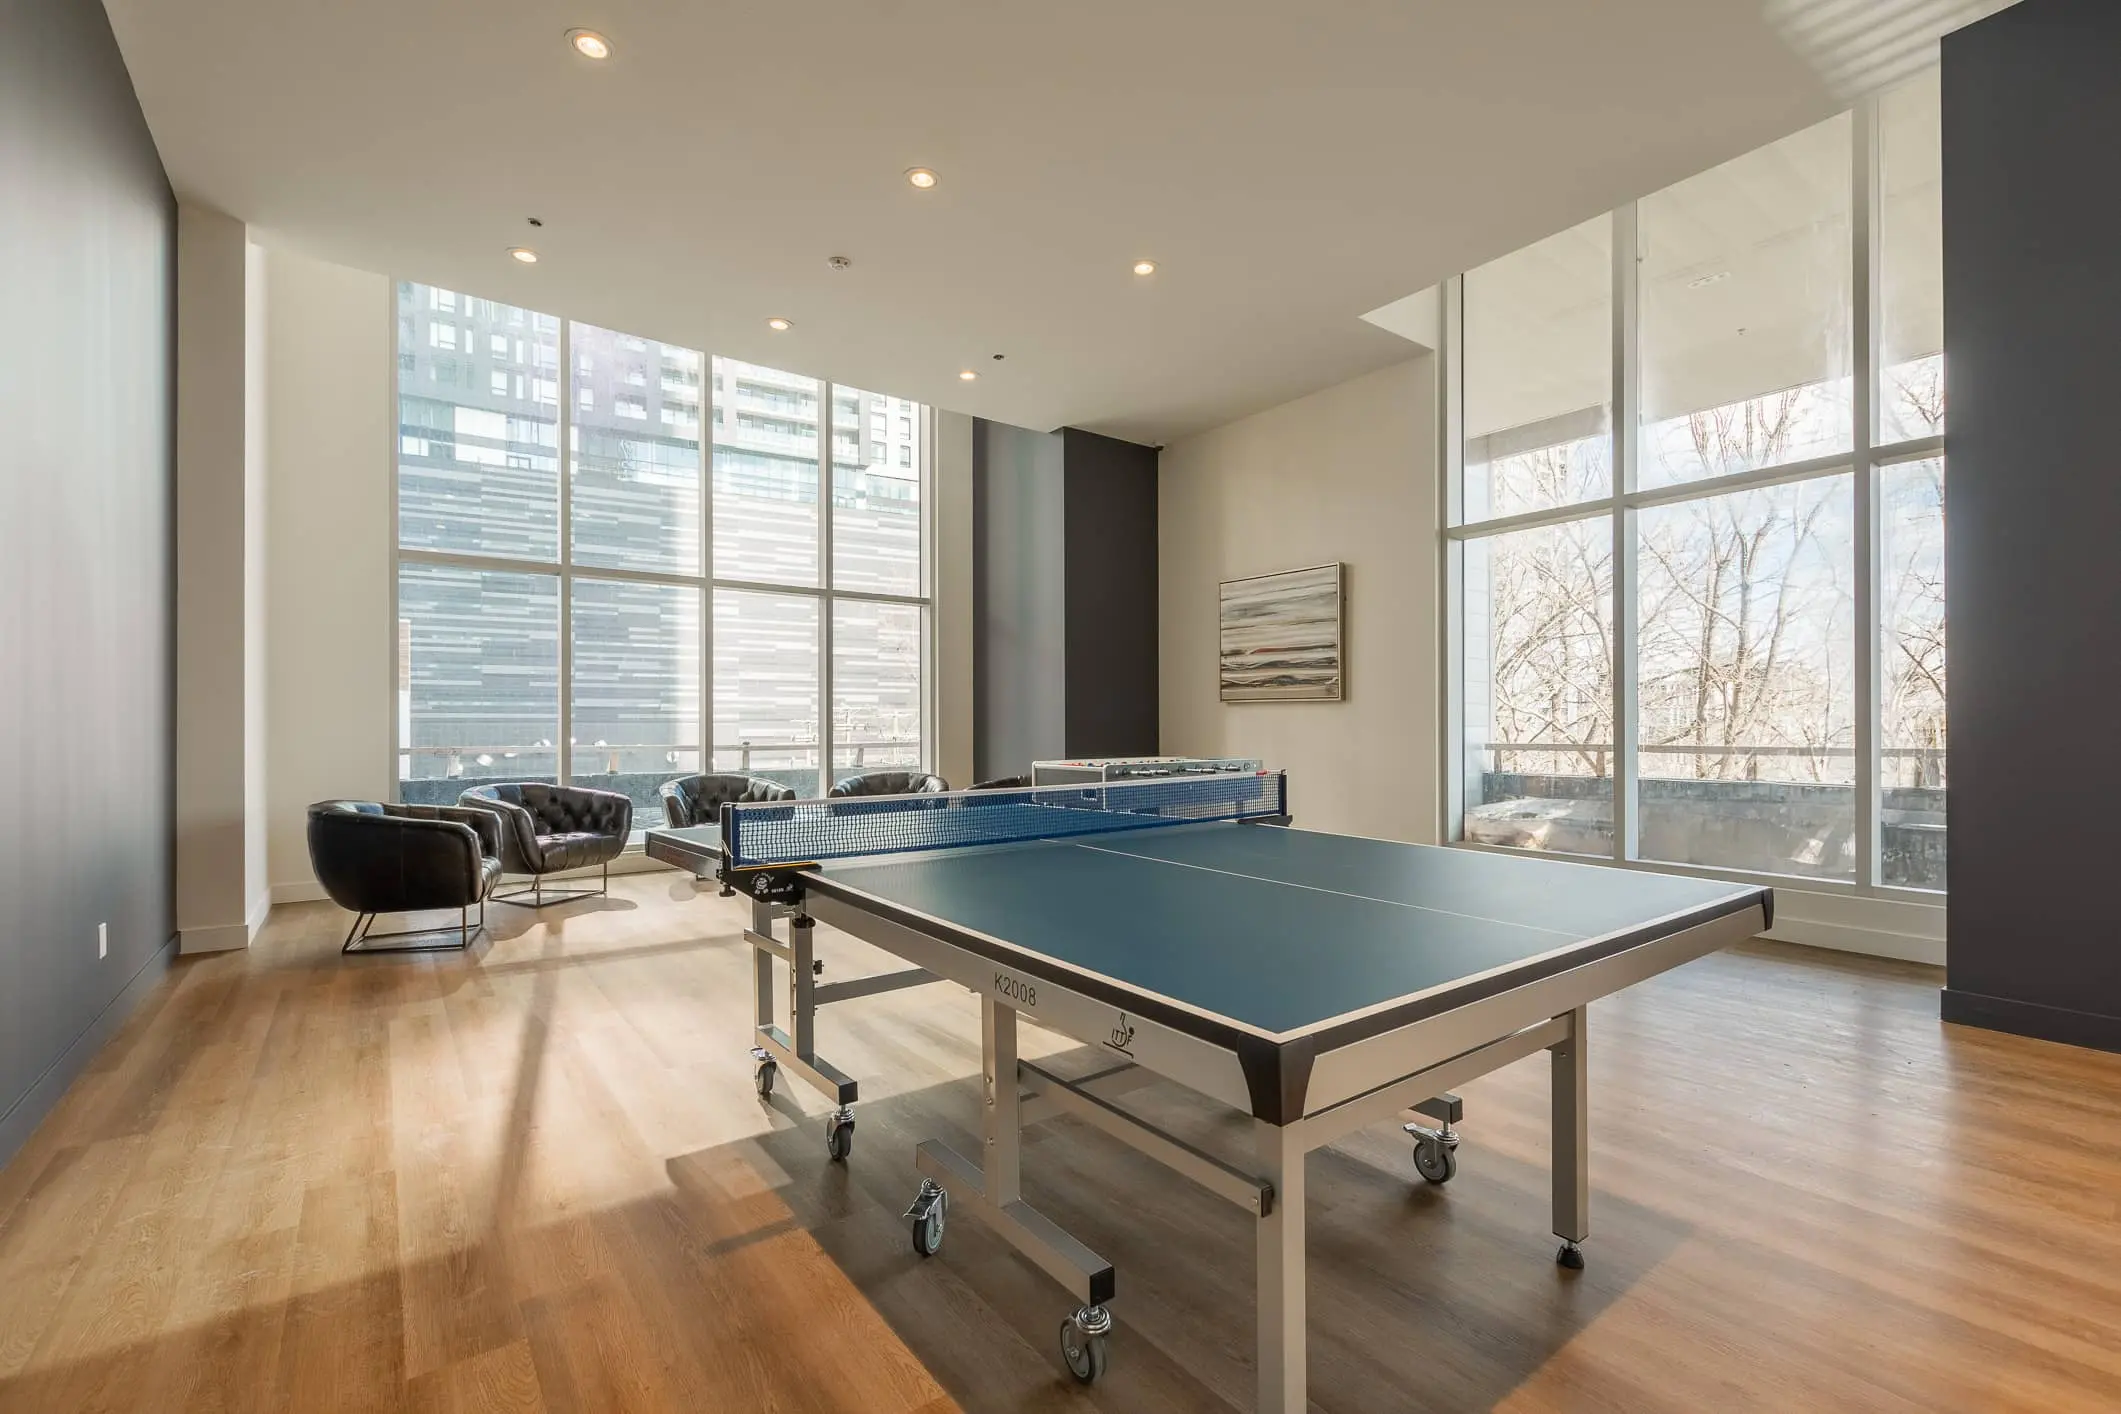 Le George apartments for rent downtown Montreal - gaming room Vues-d_ensemble-by-Kptur-25